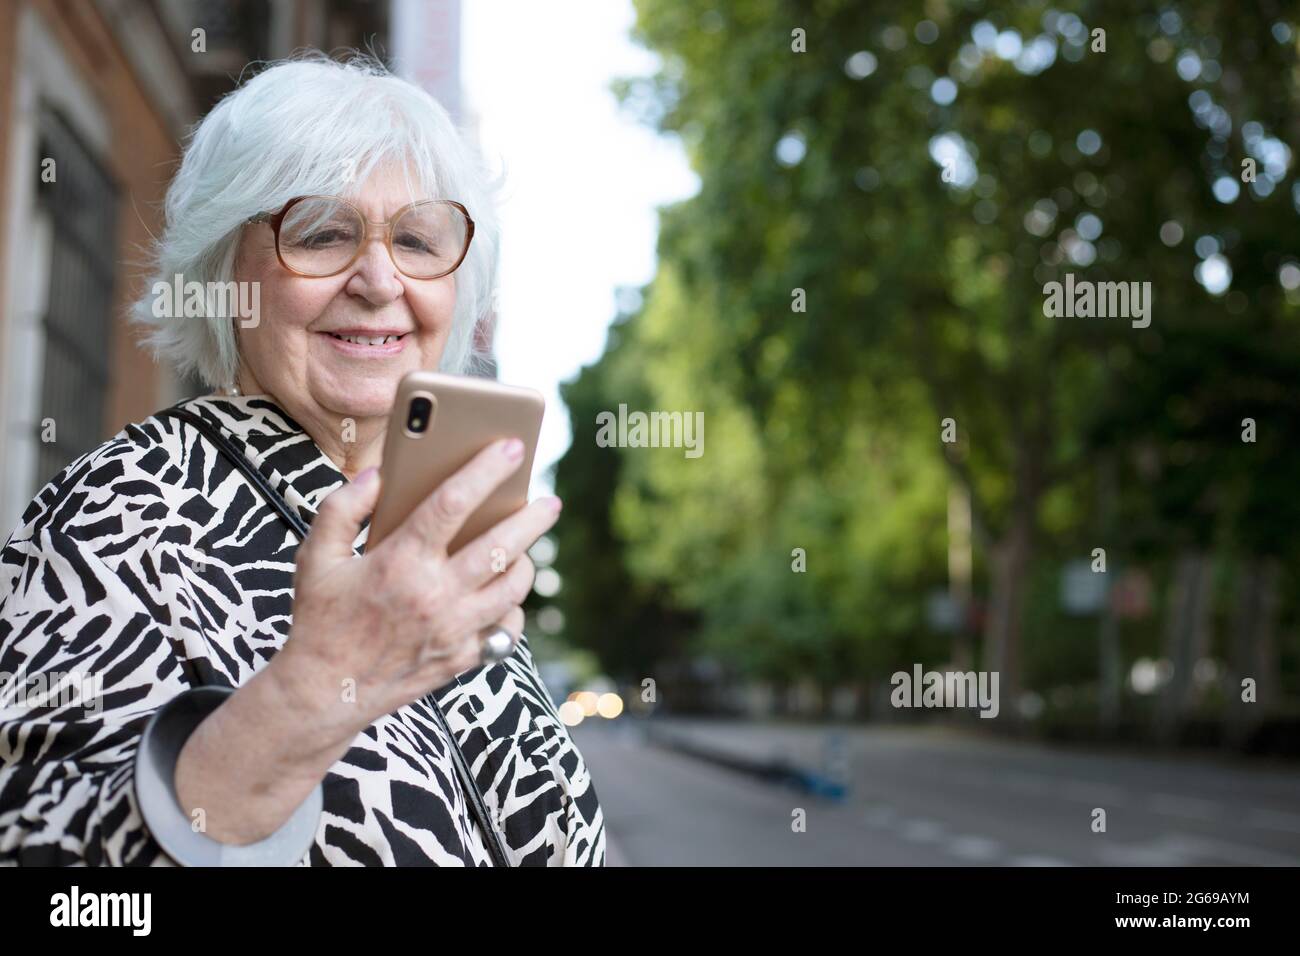 portrait of older woman looking at her cell phone on the street Stock Photo